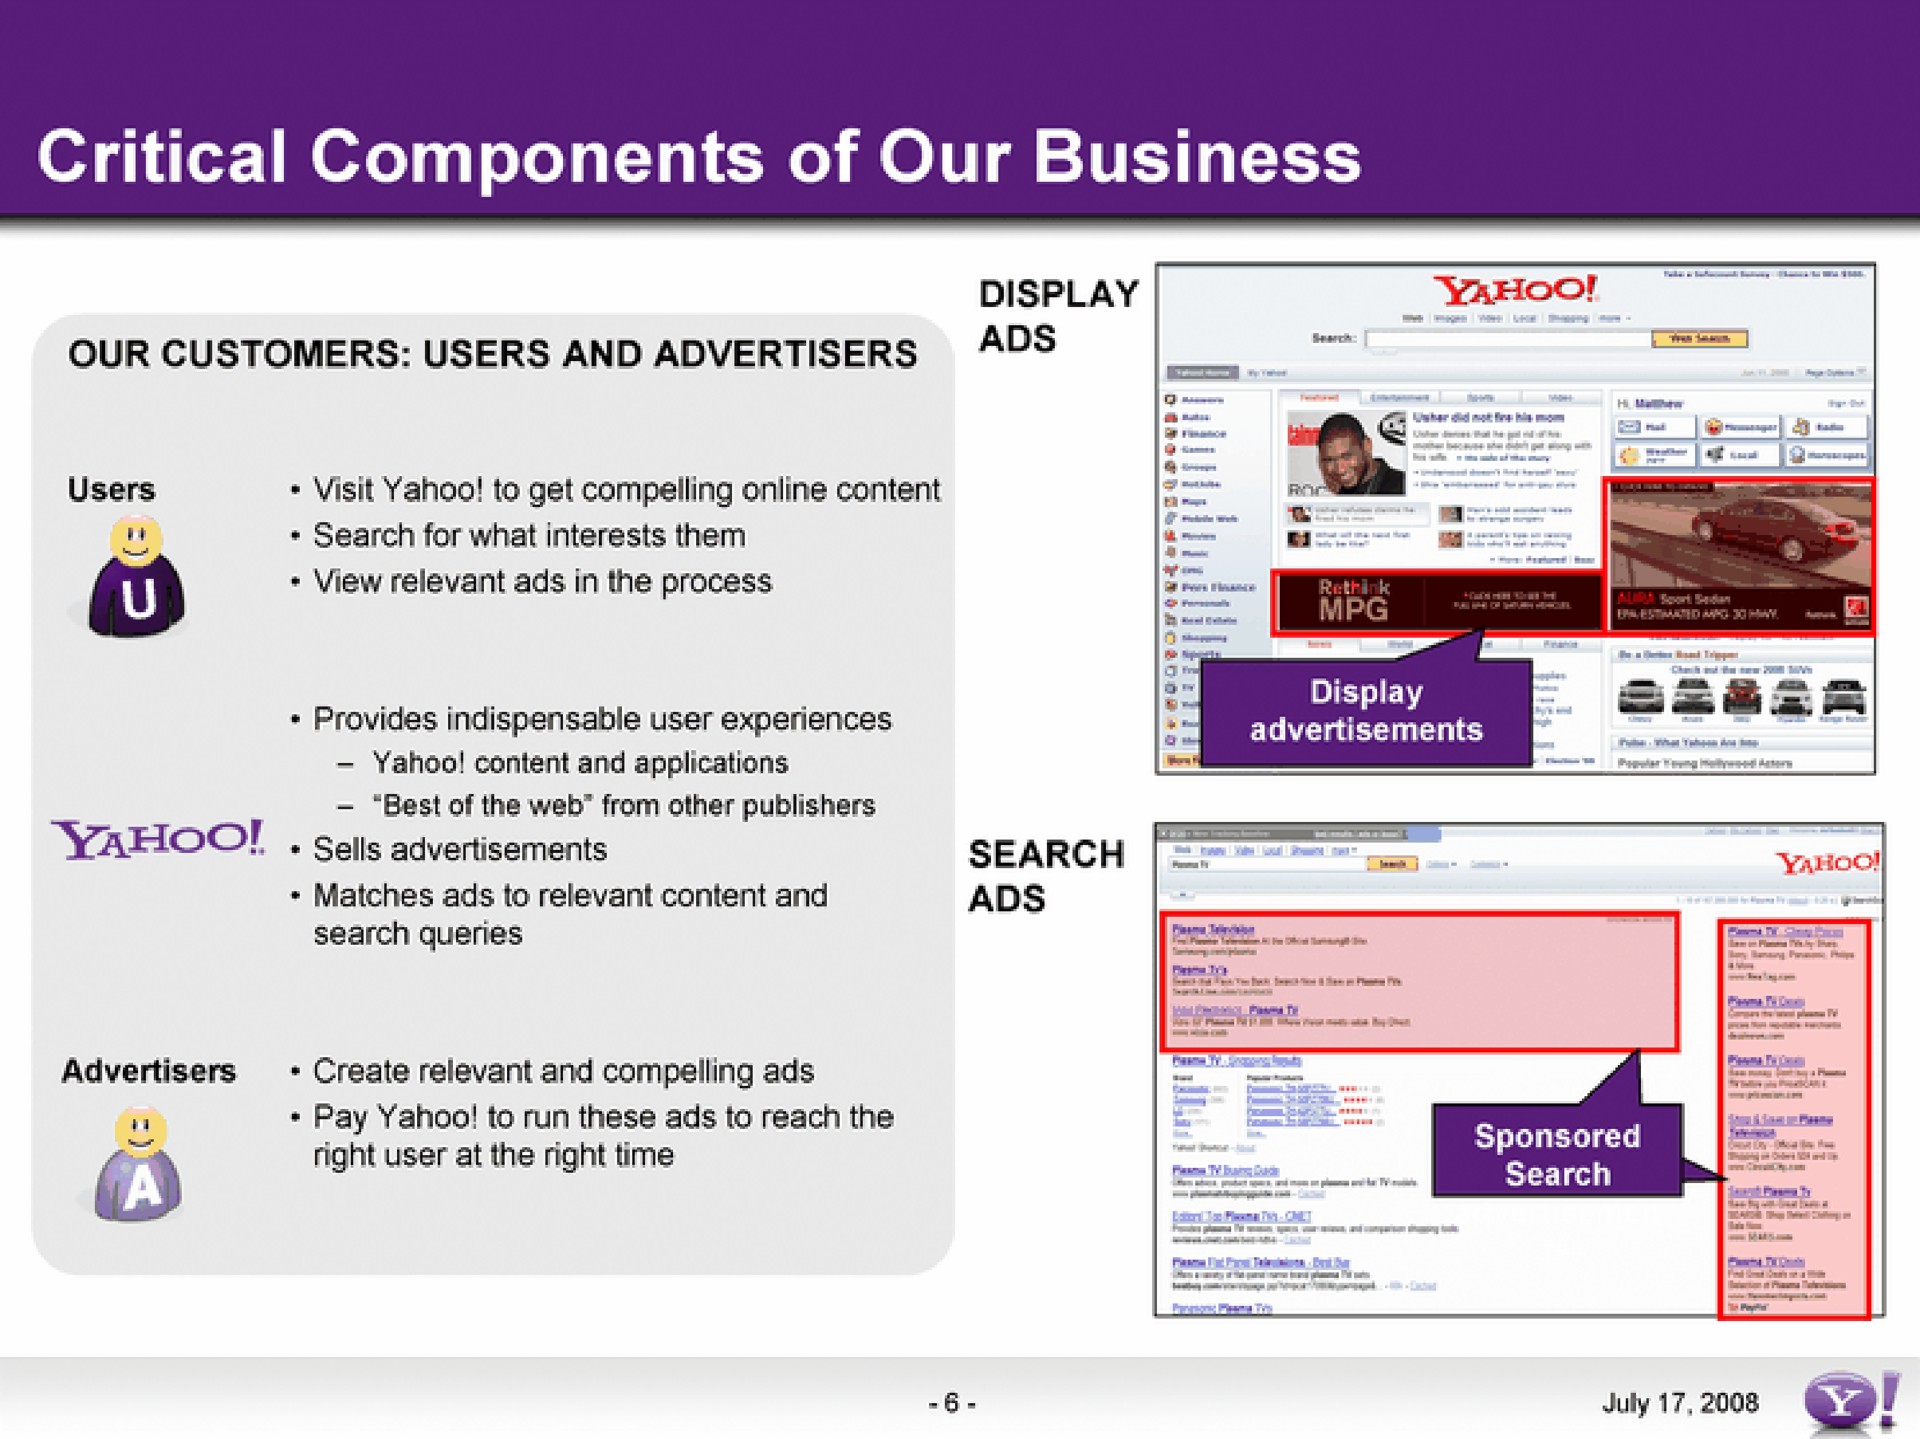 critical components of our business | Yahoo